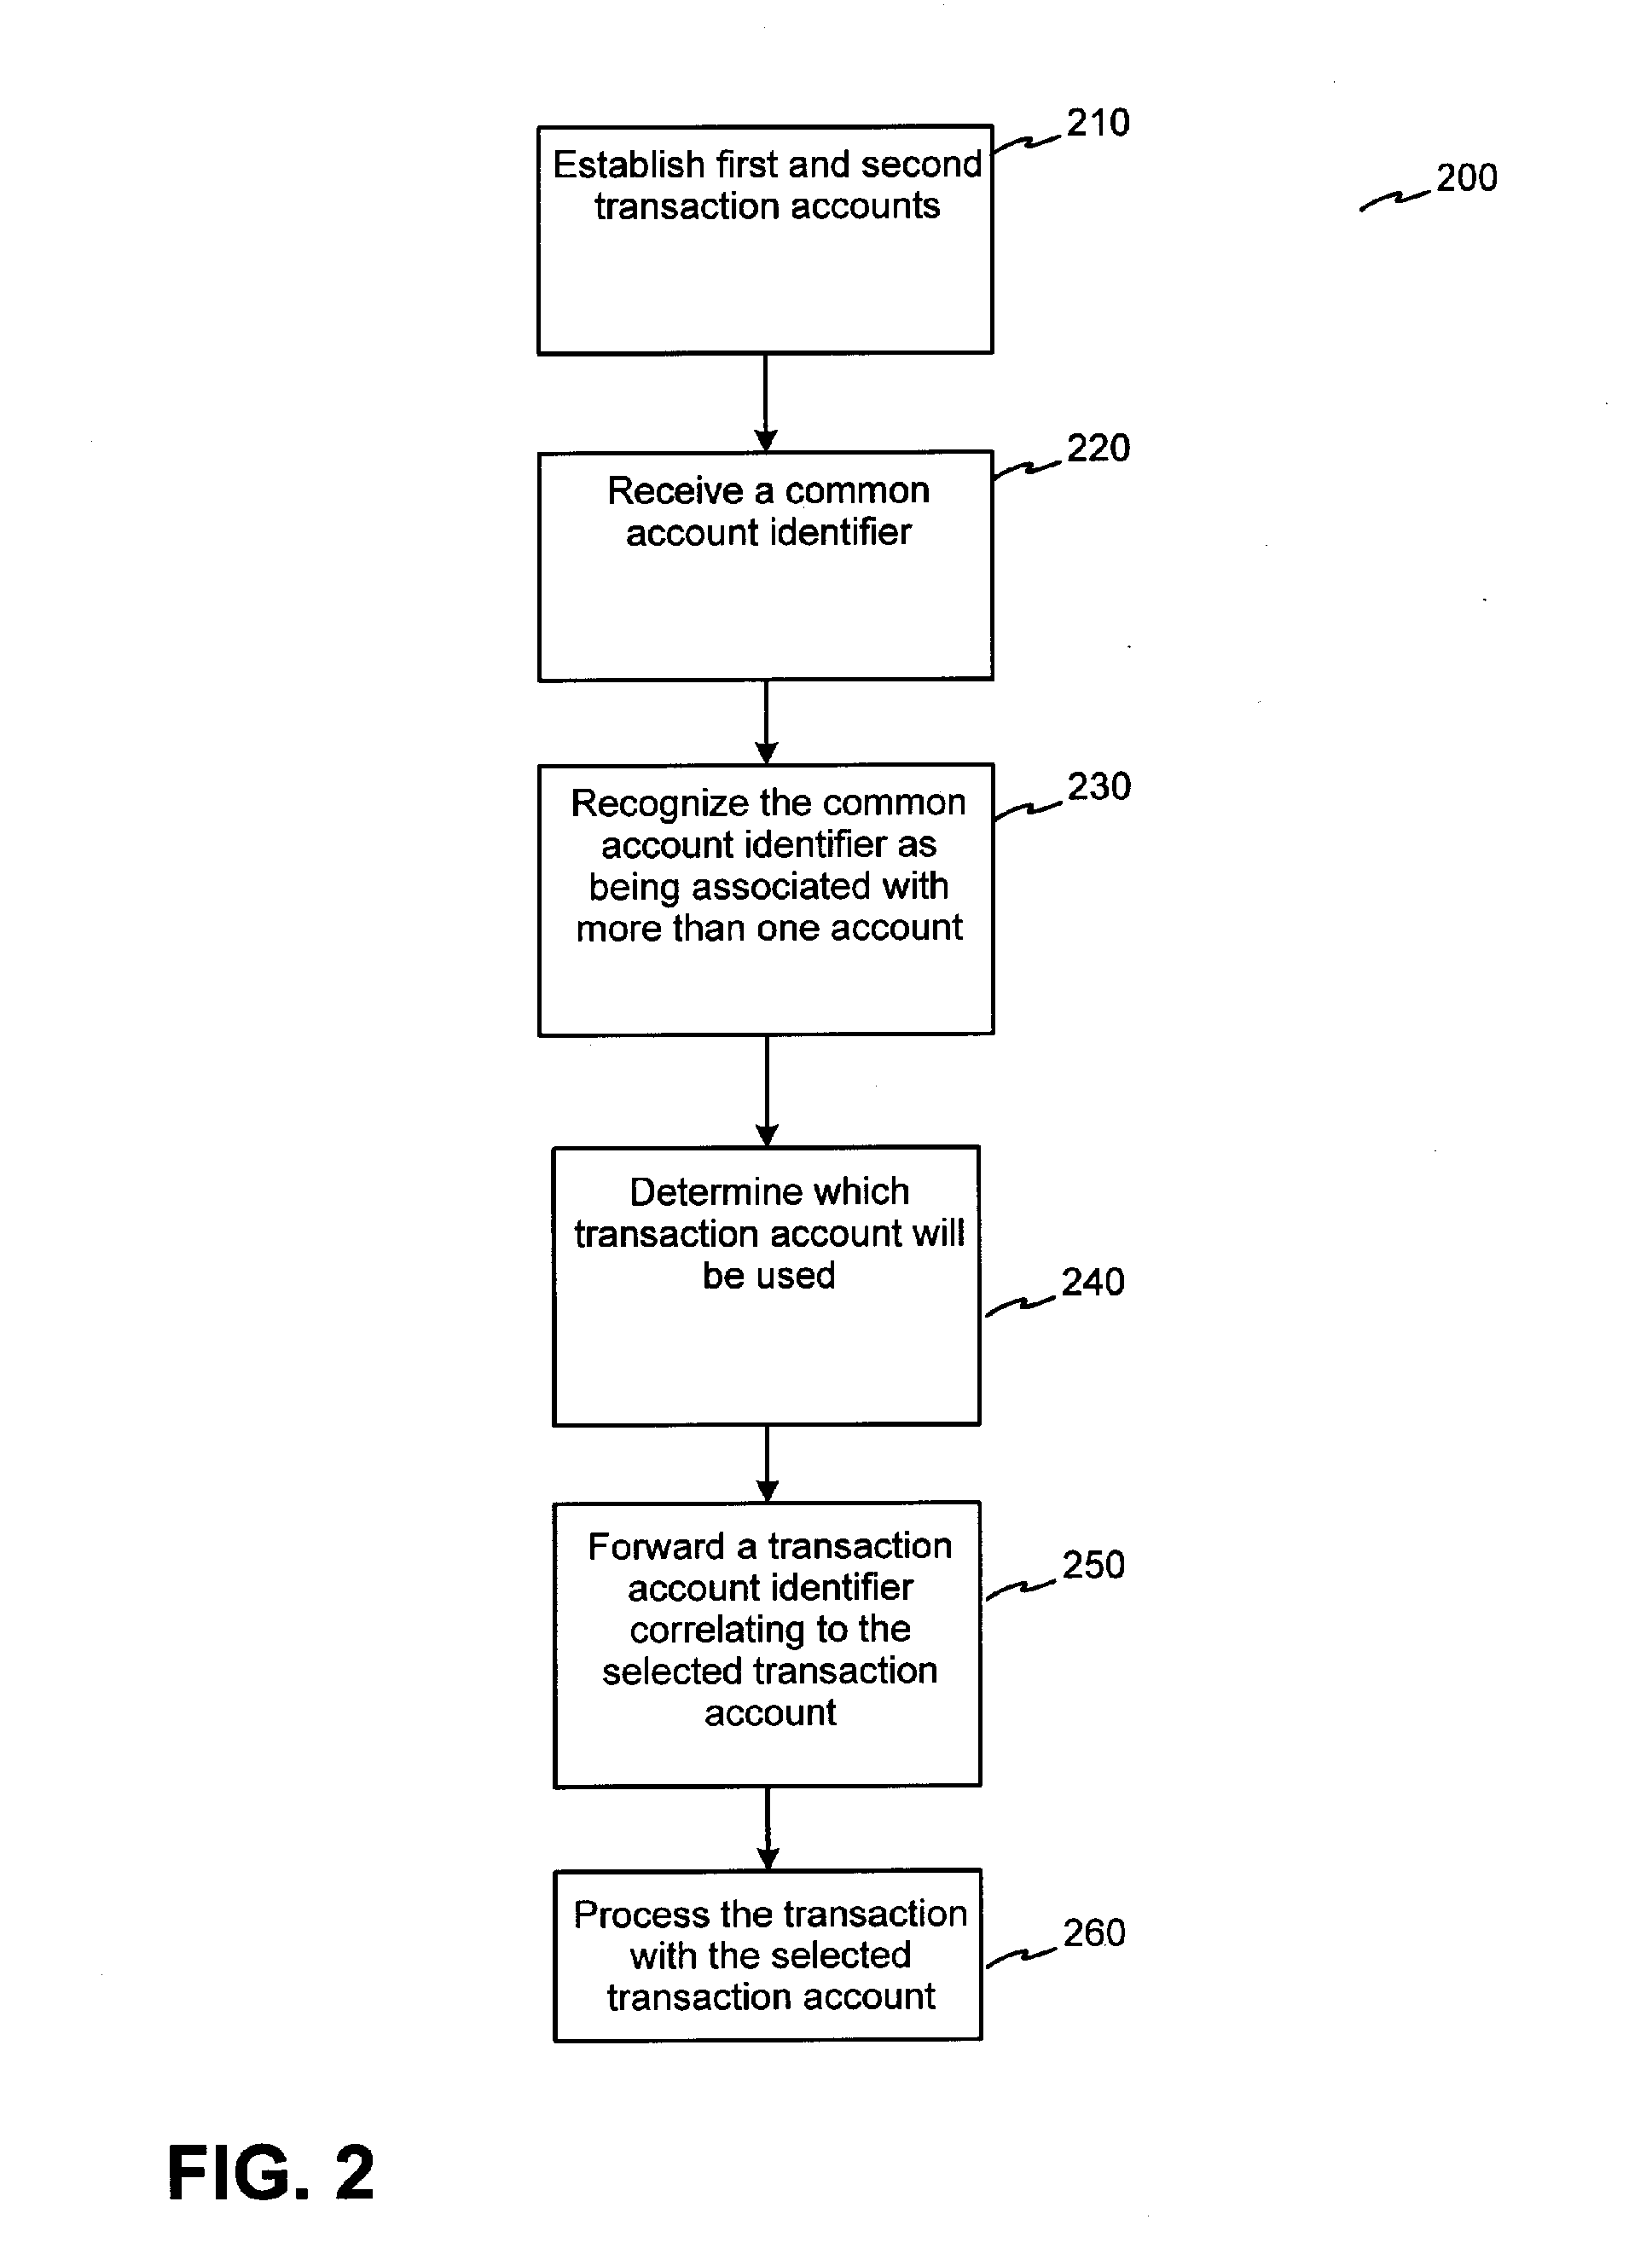 Systems, methods, and devices for combined credit card and stored value transaction accounts